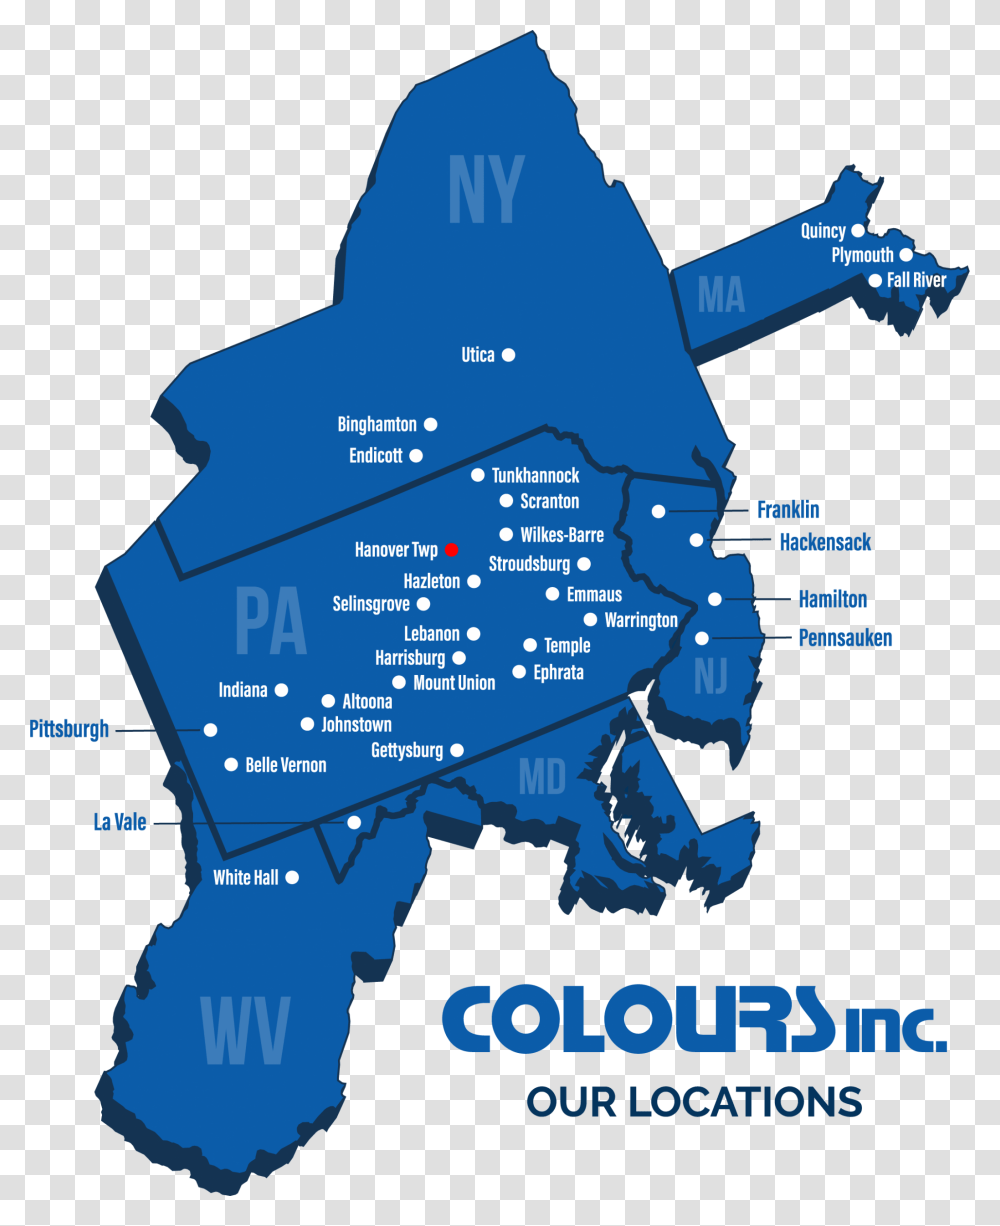 3d Blue Map Of Colours Inc Store Locations With Plot Poster, Diagram, Land, Outdoors, Nature Transparent Png